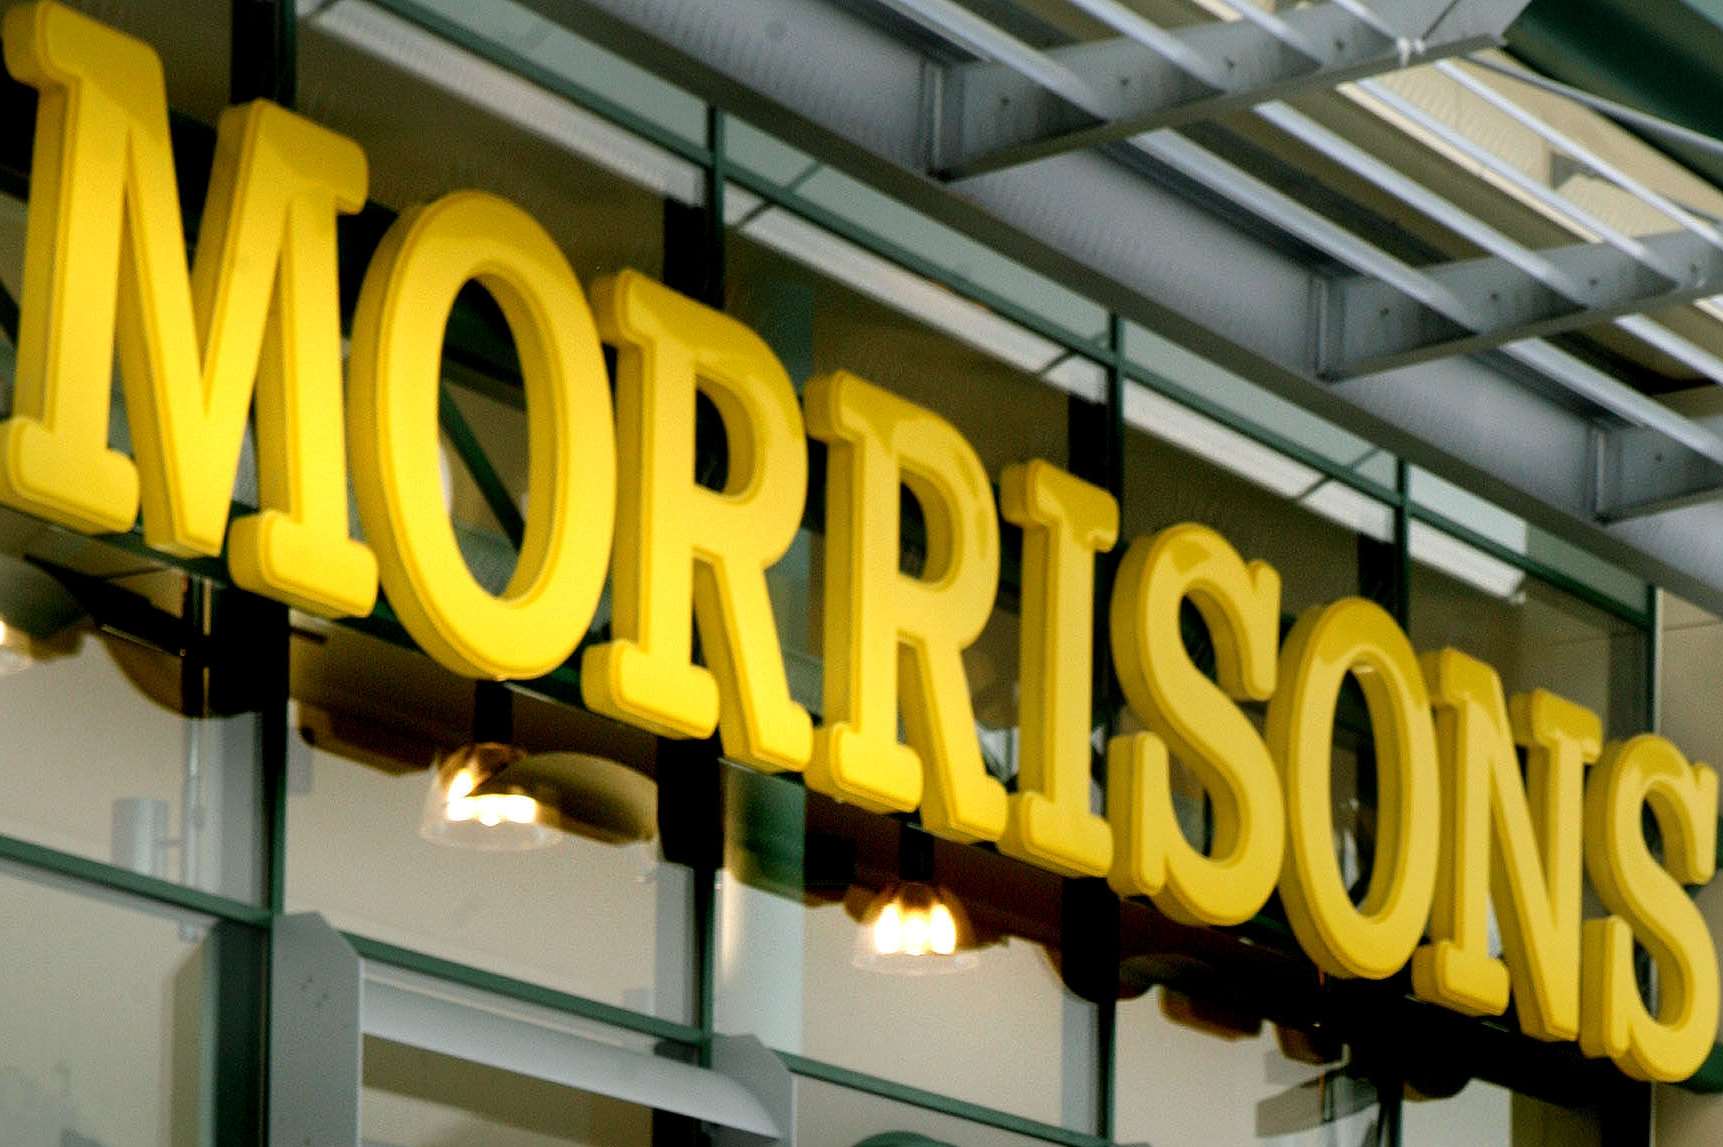 APC Technology suffered heavy losses on contracts it had to install LED lighting at Morrisons supermarkets